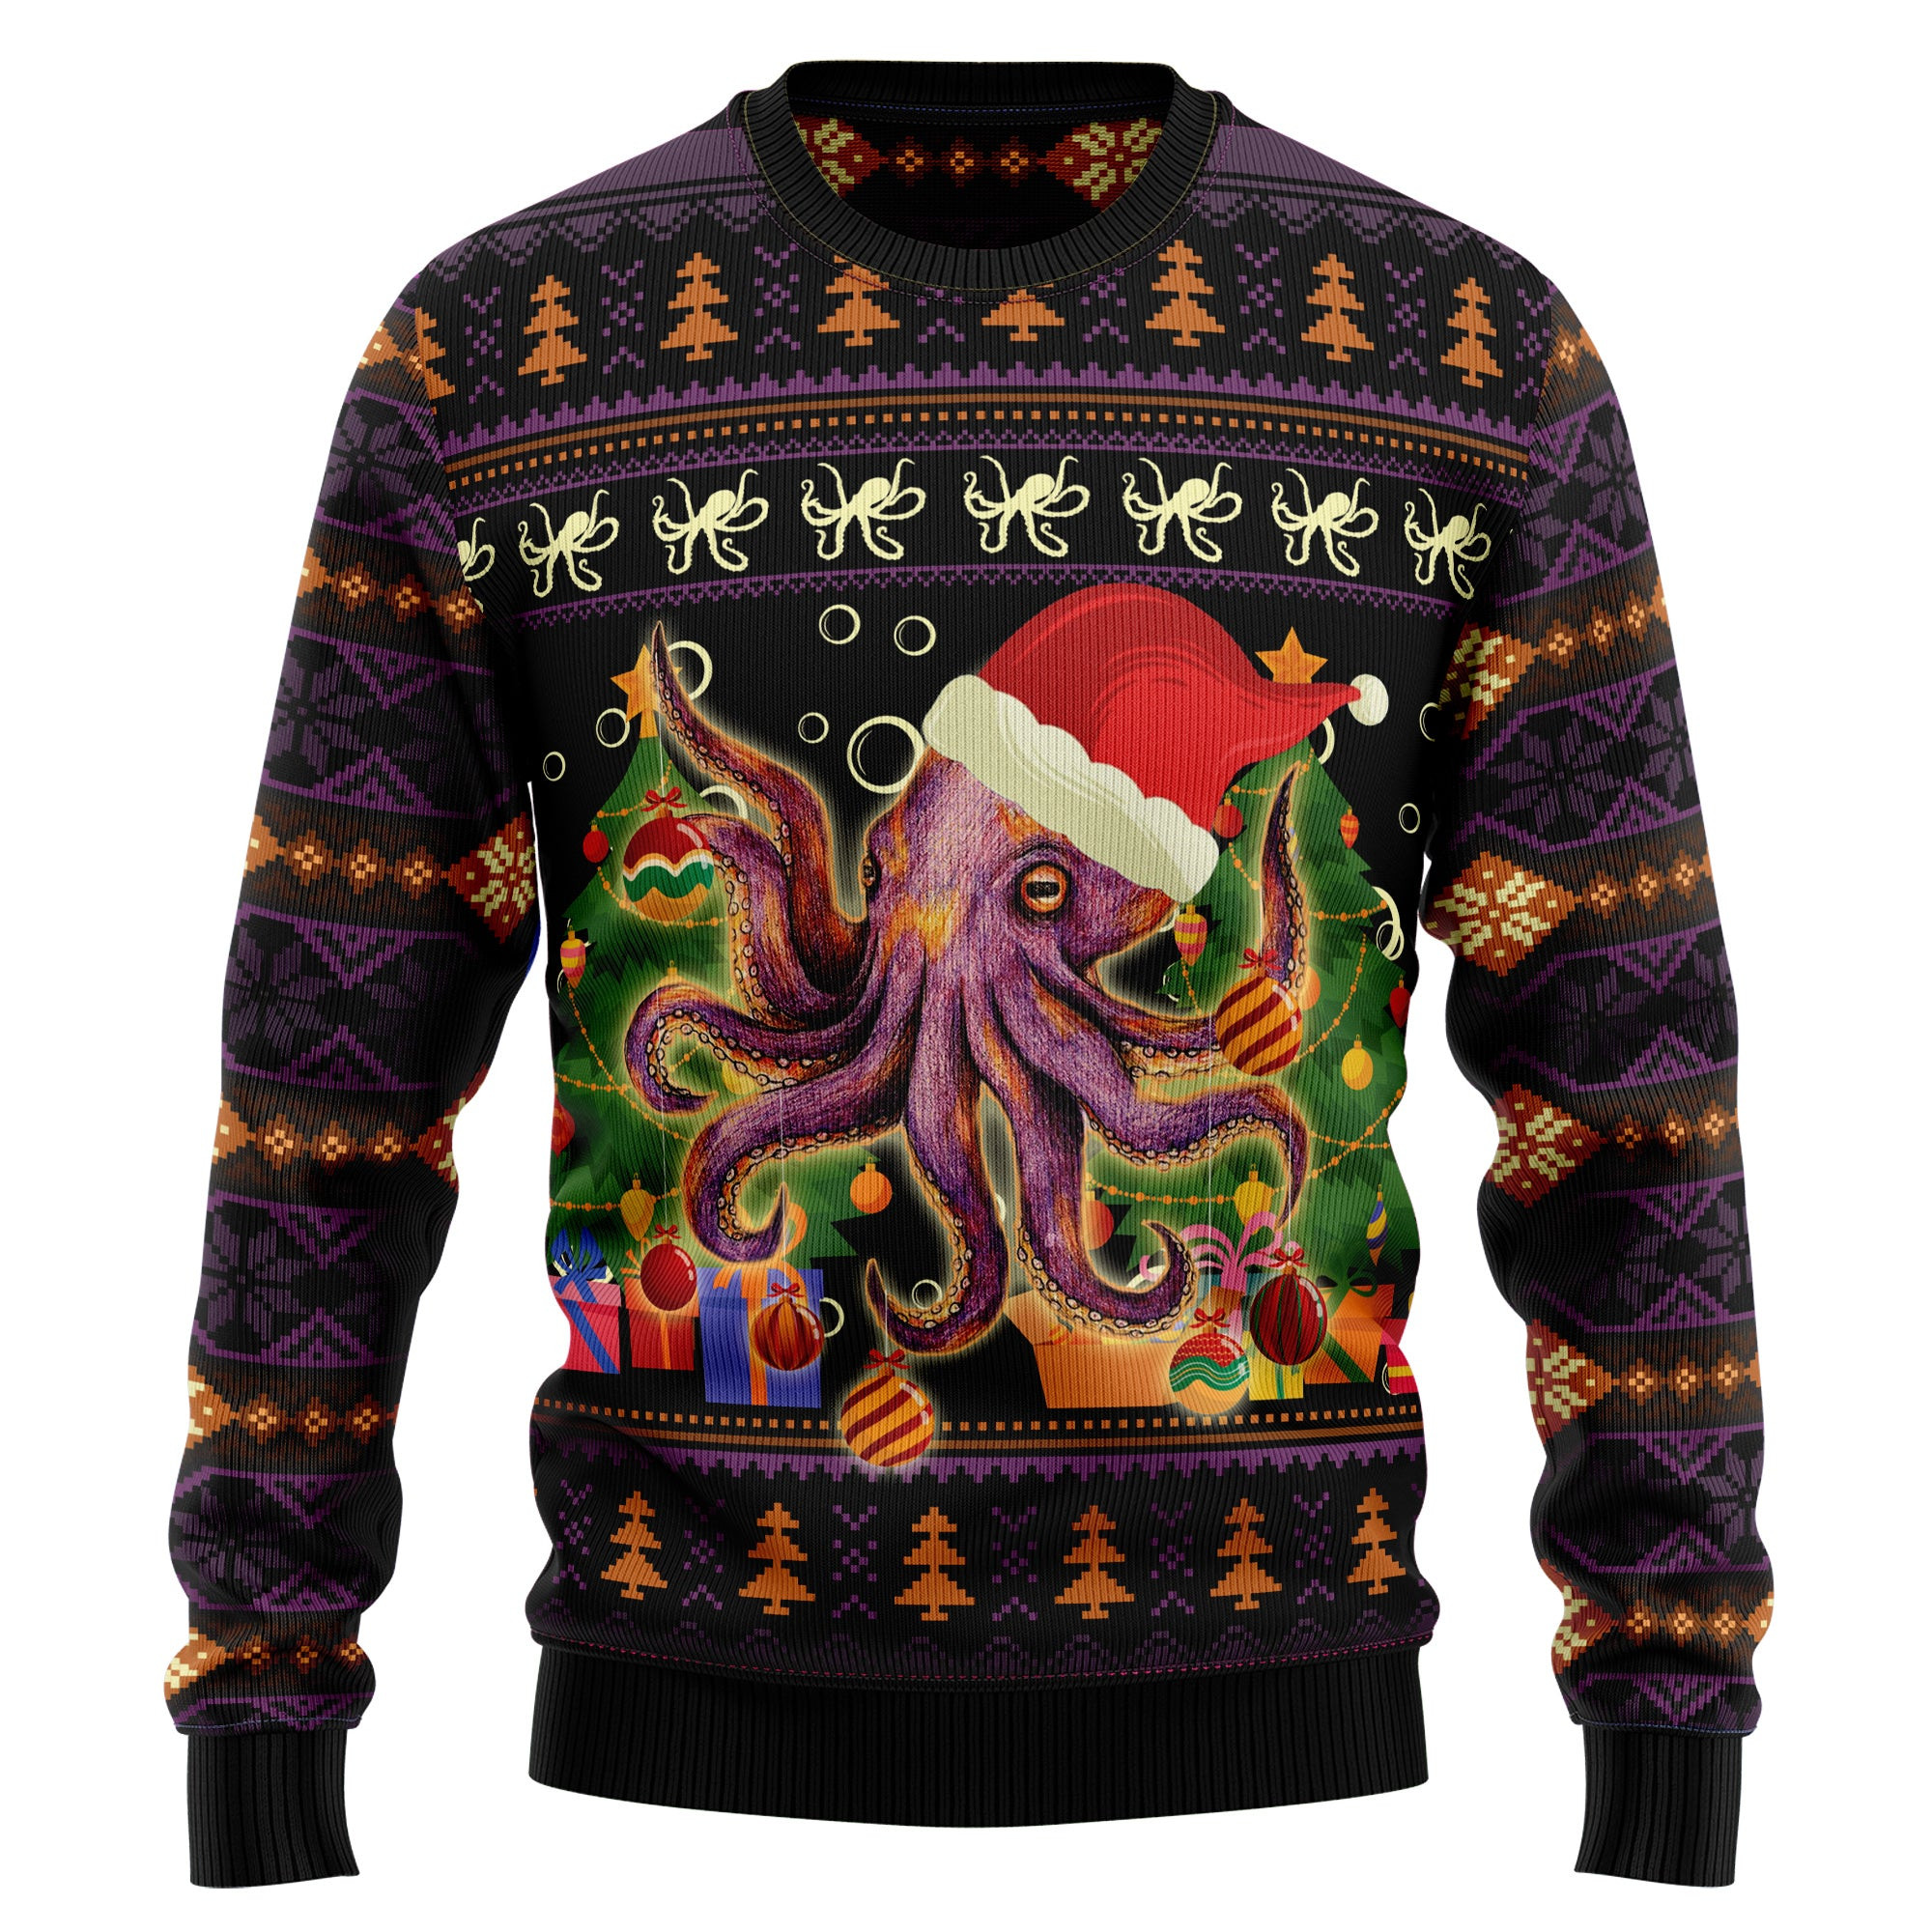 Octopus Ornament Ugly Christmas Sweater